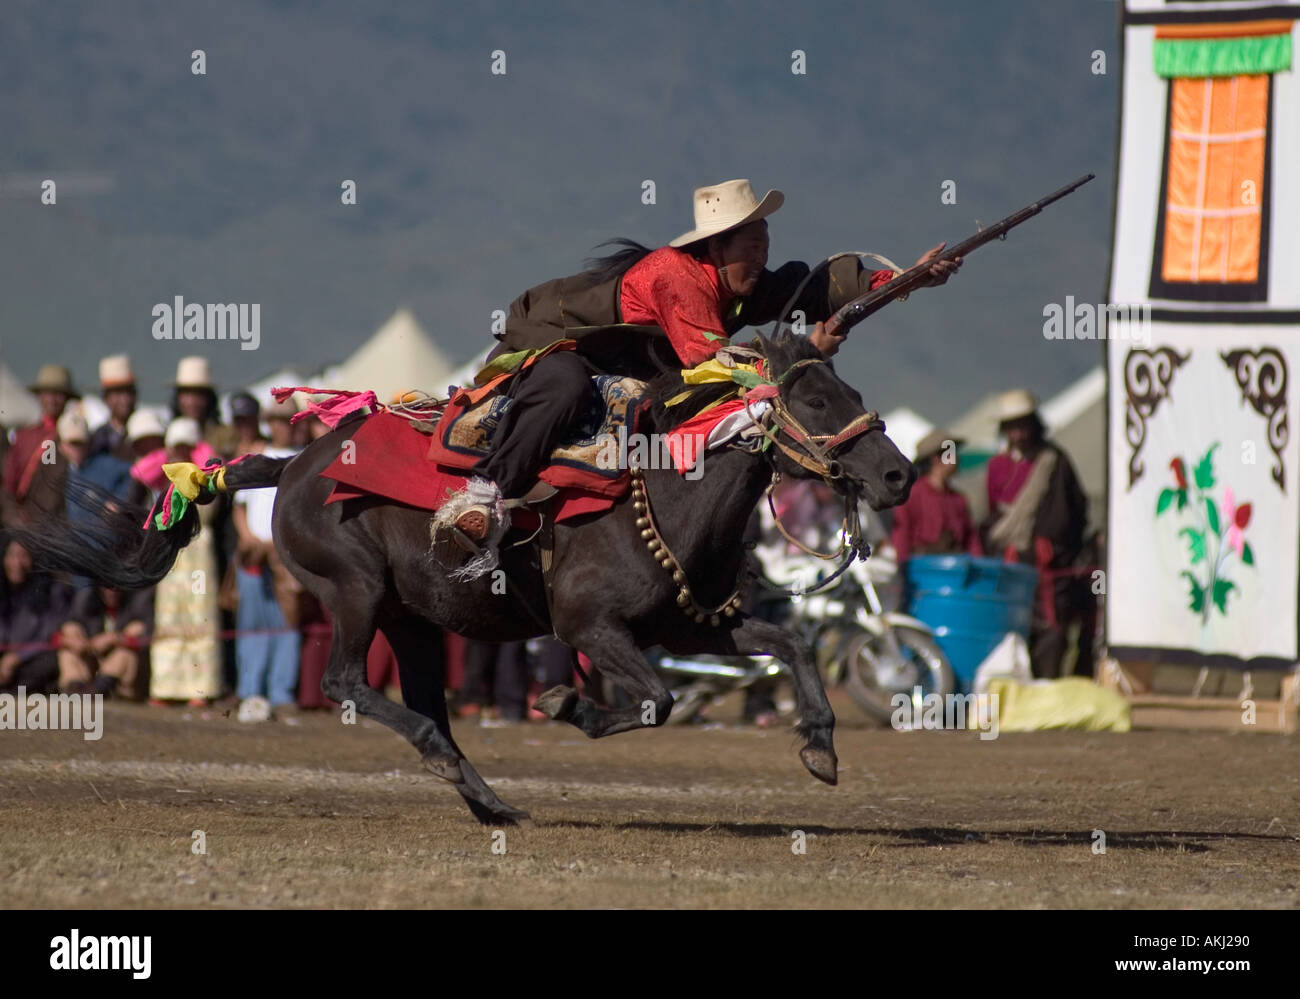 Khampas compete in rifle shooting contest on horseback at the Litang Horse Festival Kham Sichuan Province China Tibet  Stock Photo